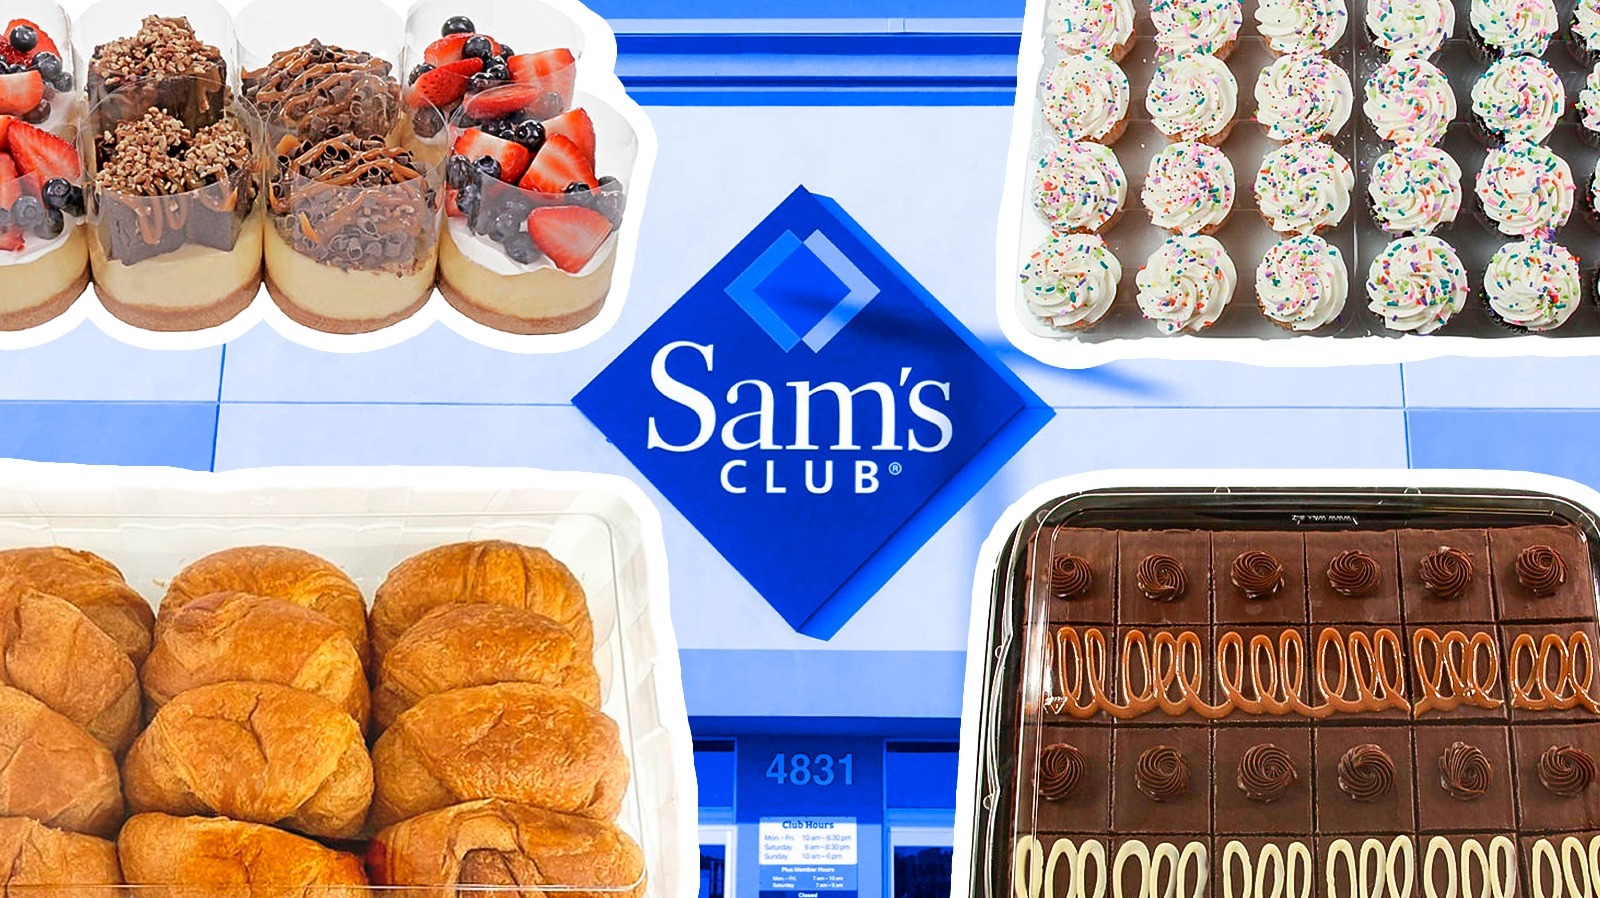 The Best Bakery Treats At Sam’s Club, Ranked – The Daily Meal